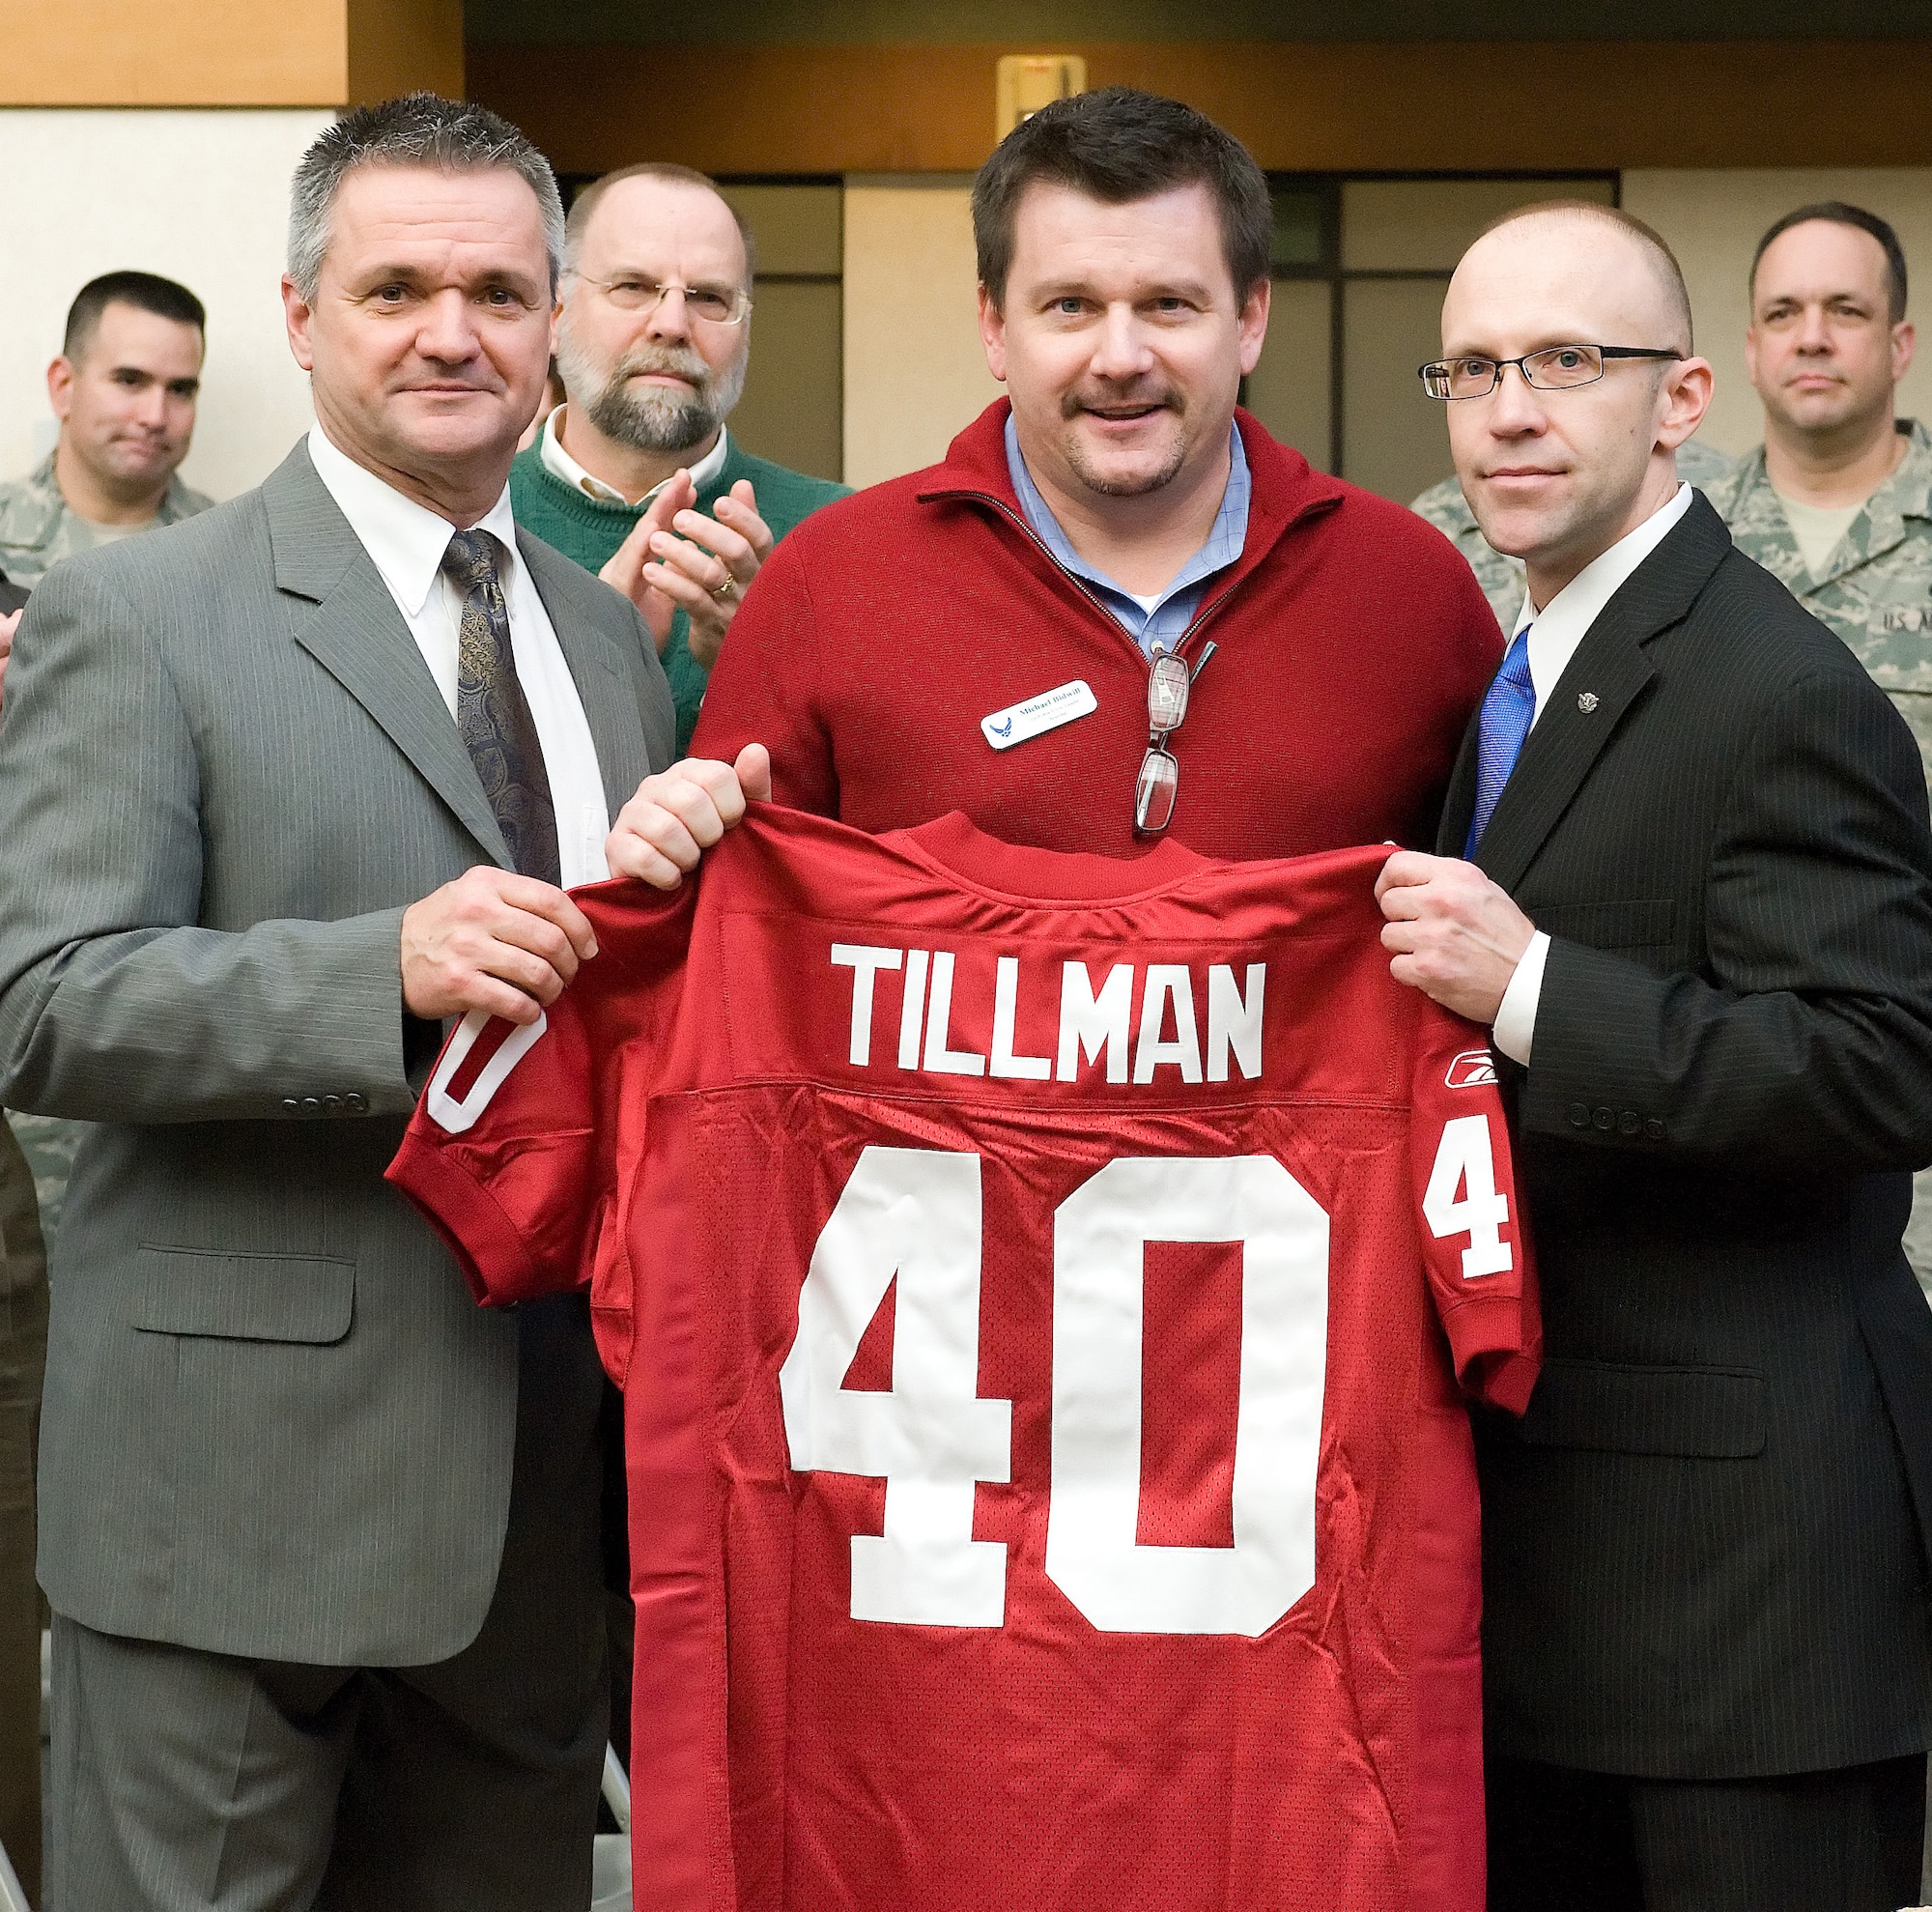 William Zwicharowski (left), Michael Bidwill, president of the Arizona Cardinals Football Club, and Trevor Dean, deputy to the commander, Air Force Mortuary Affairs Operations pose with the Pat Tillman jersey Mr. Bidwill presented to AFMAO during a civic leader tour. (U.S. Air Force photo/Jason Minto)